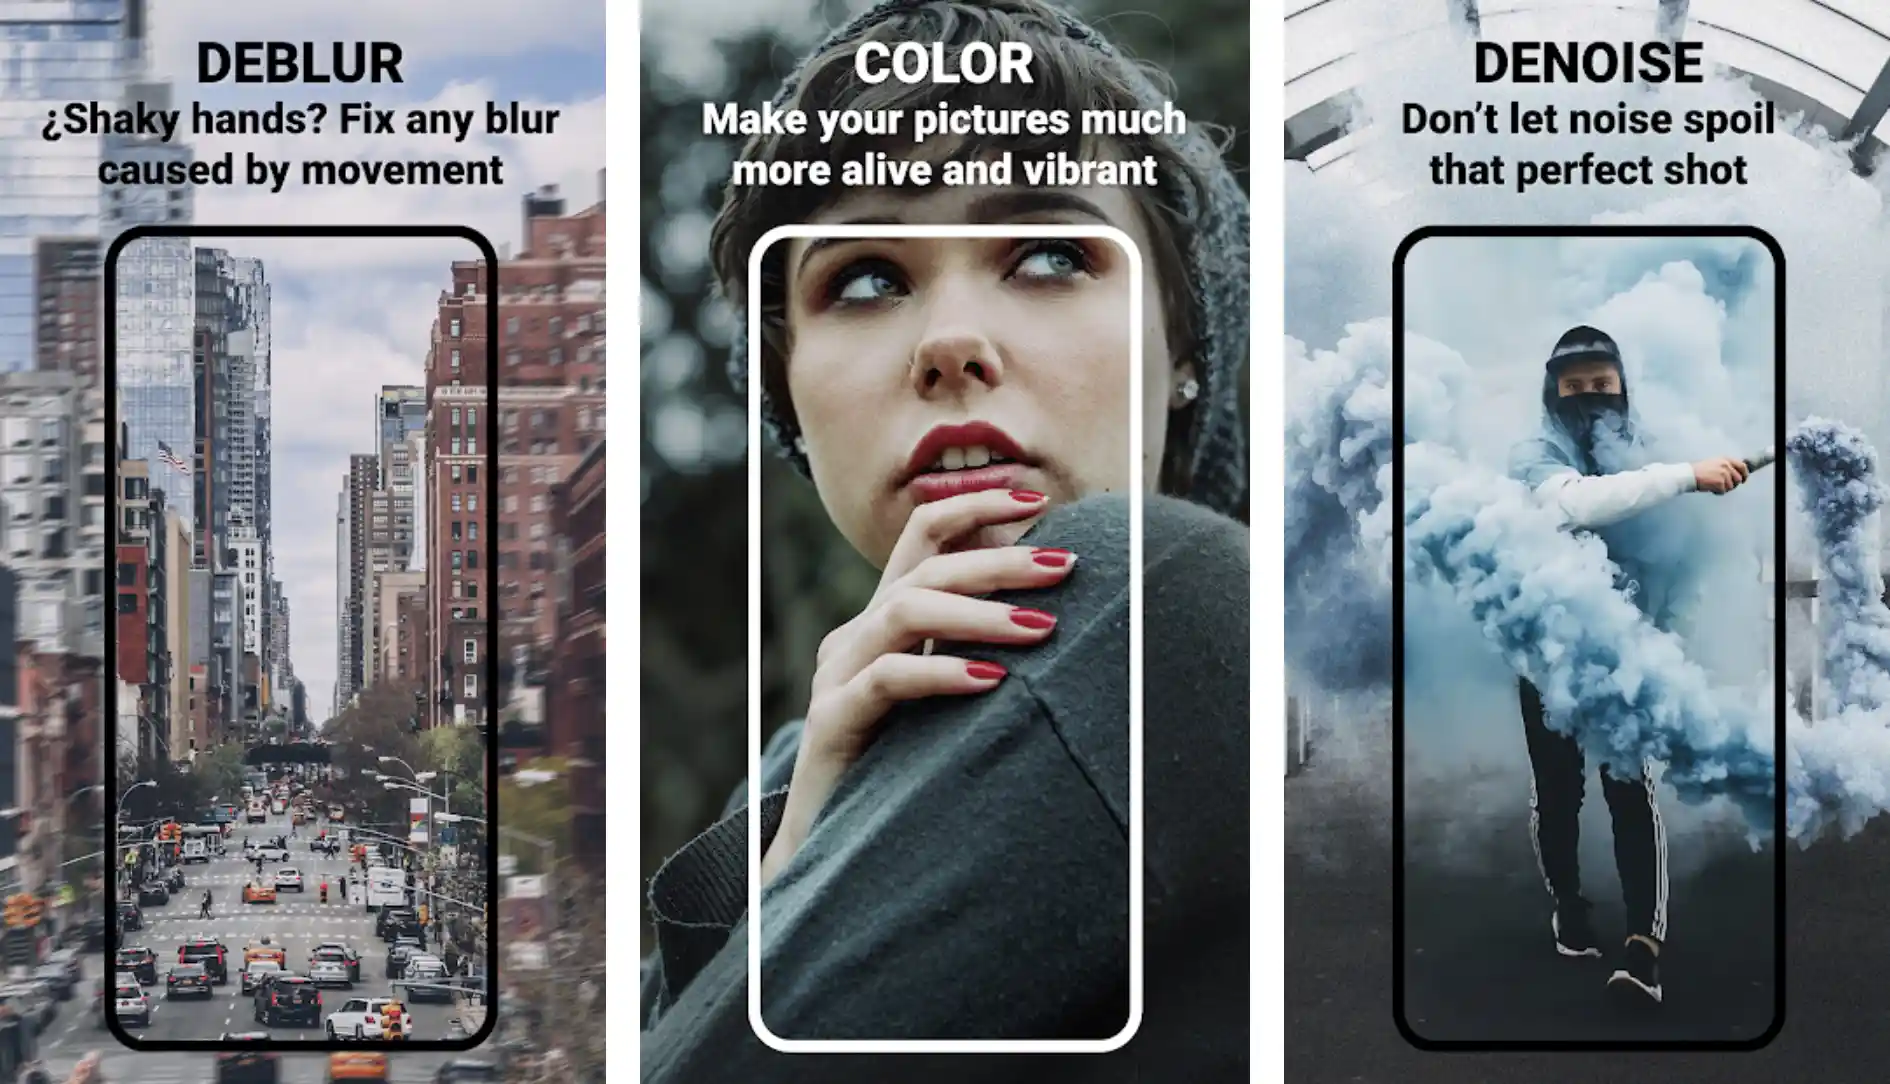 9 Best Apps To Unblur Pictures To Make Blurred Photos Clear